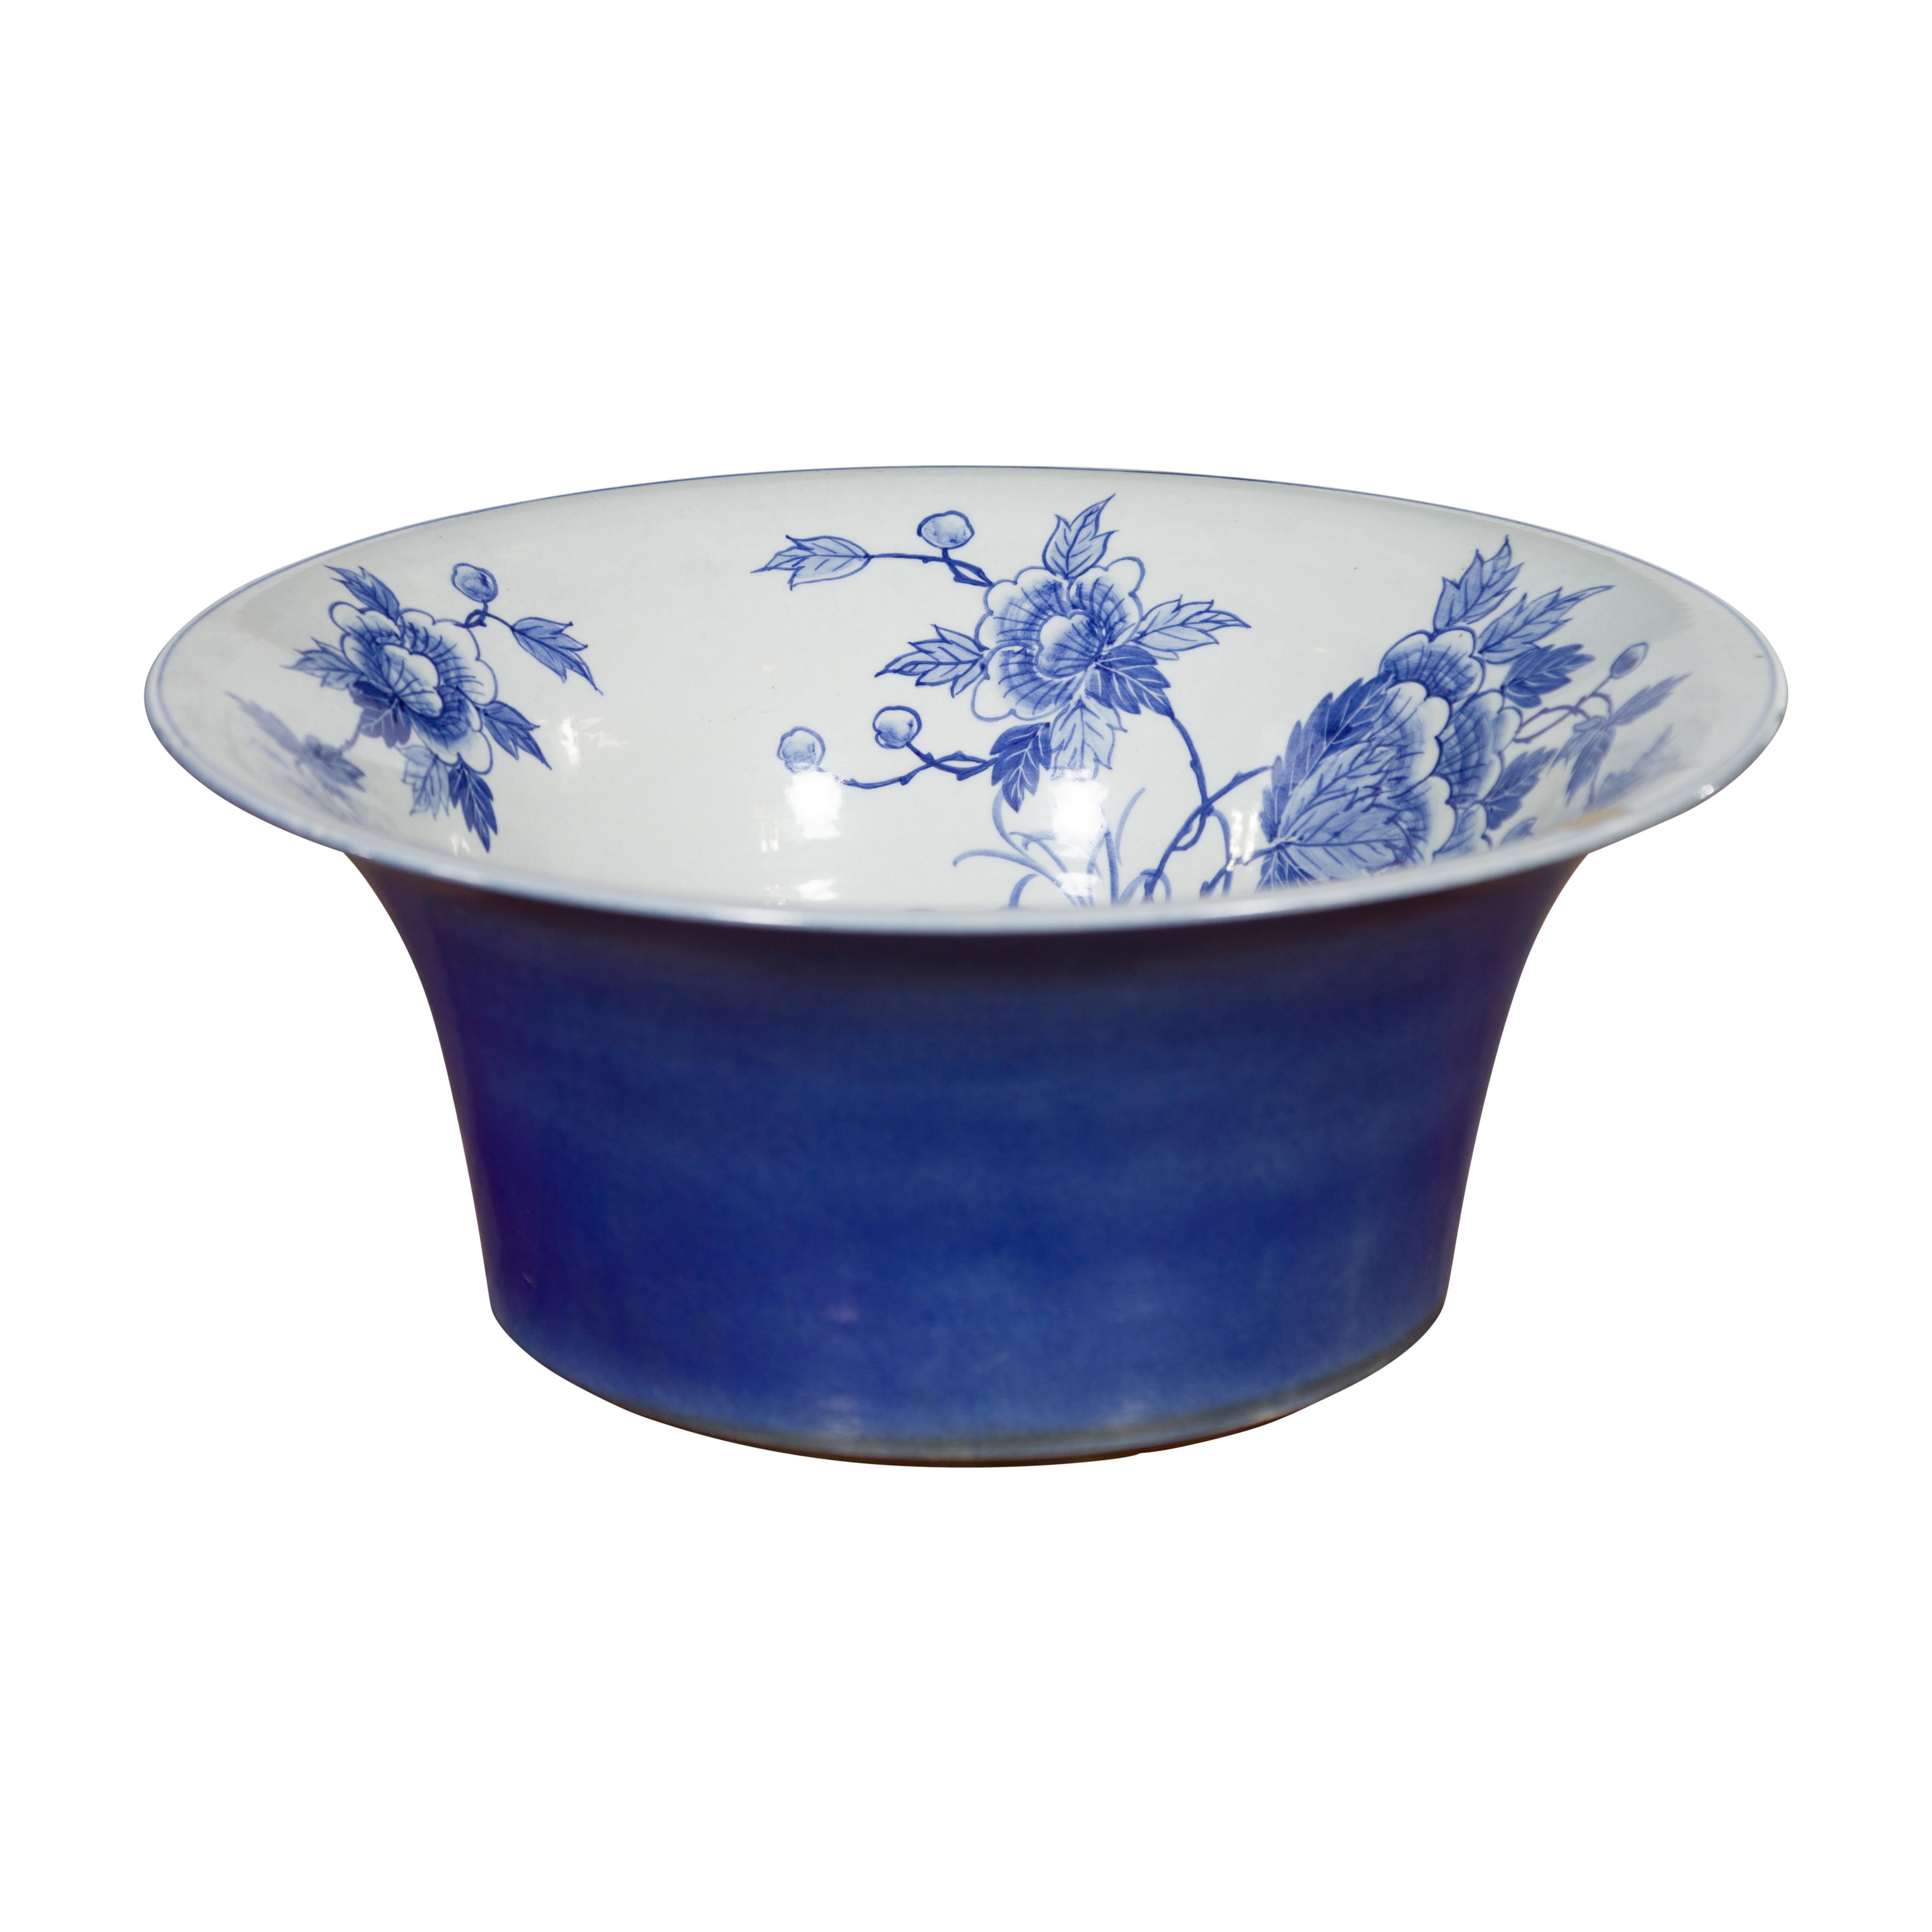 A Chinese porcelain wash basin from the 20th century, with hand-painted blue and white floral décor and cobalt blue flaring exterior. Created in China during the 20th century, this porcelain wash basin features a flaring silhouette adorned on the